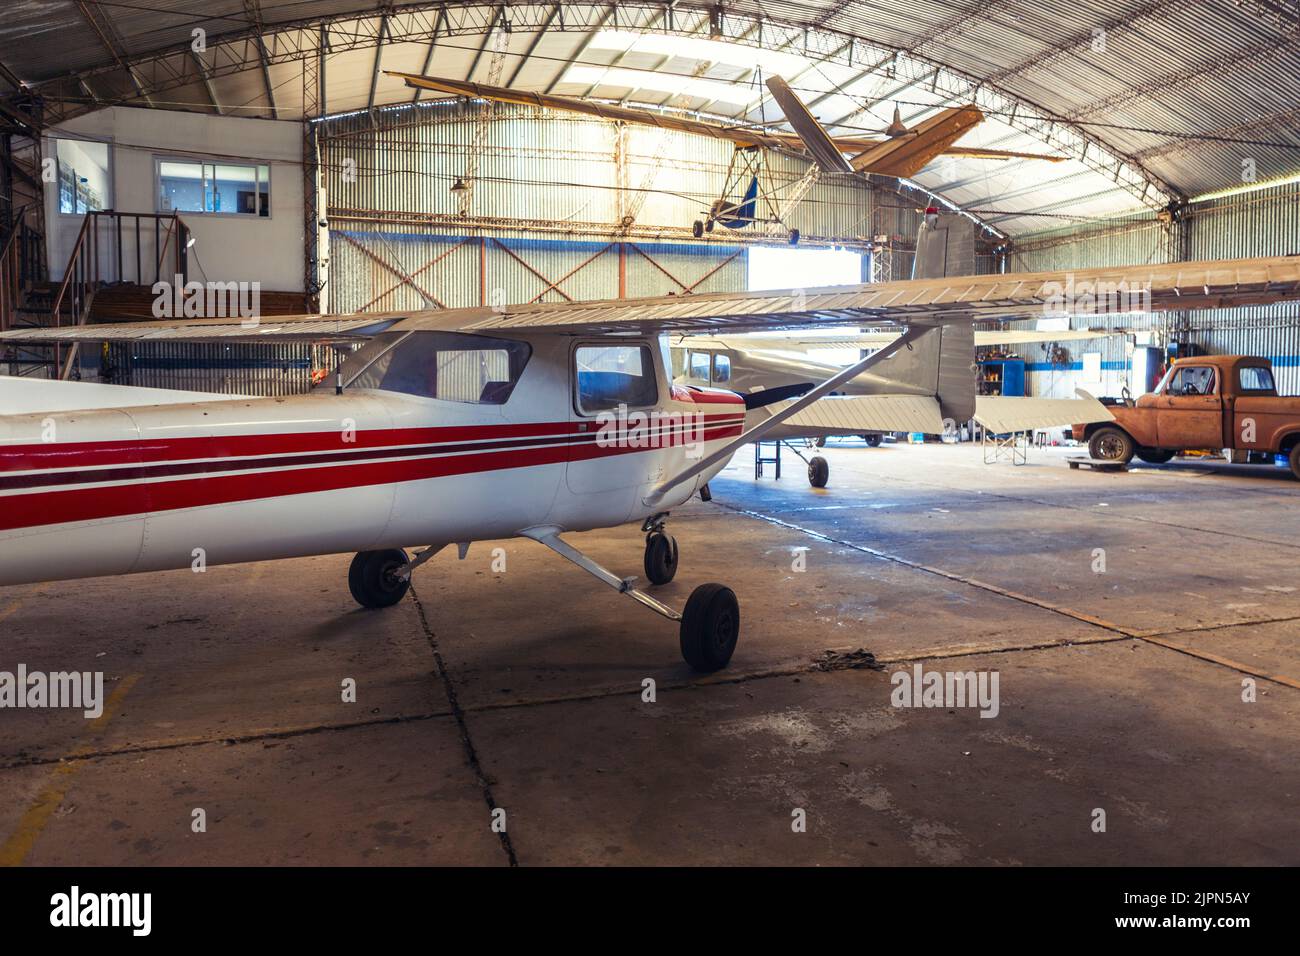 https://c8.alamy.com/comp/2JPN5AY/photo-of-old-hangar-with-airplanes-and-old-truck-2JPN5AY.jpg